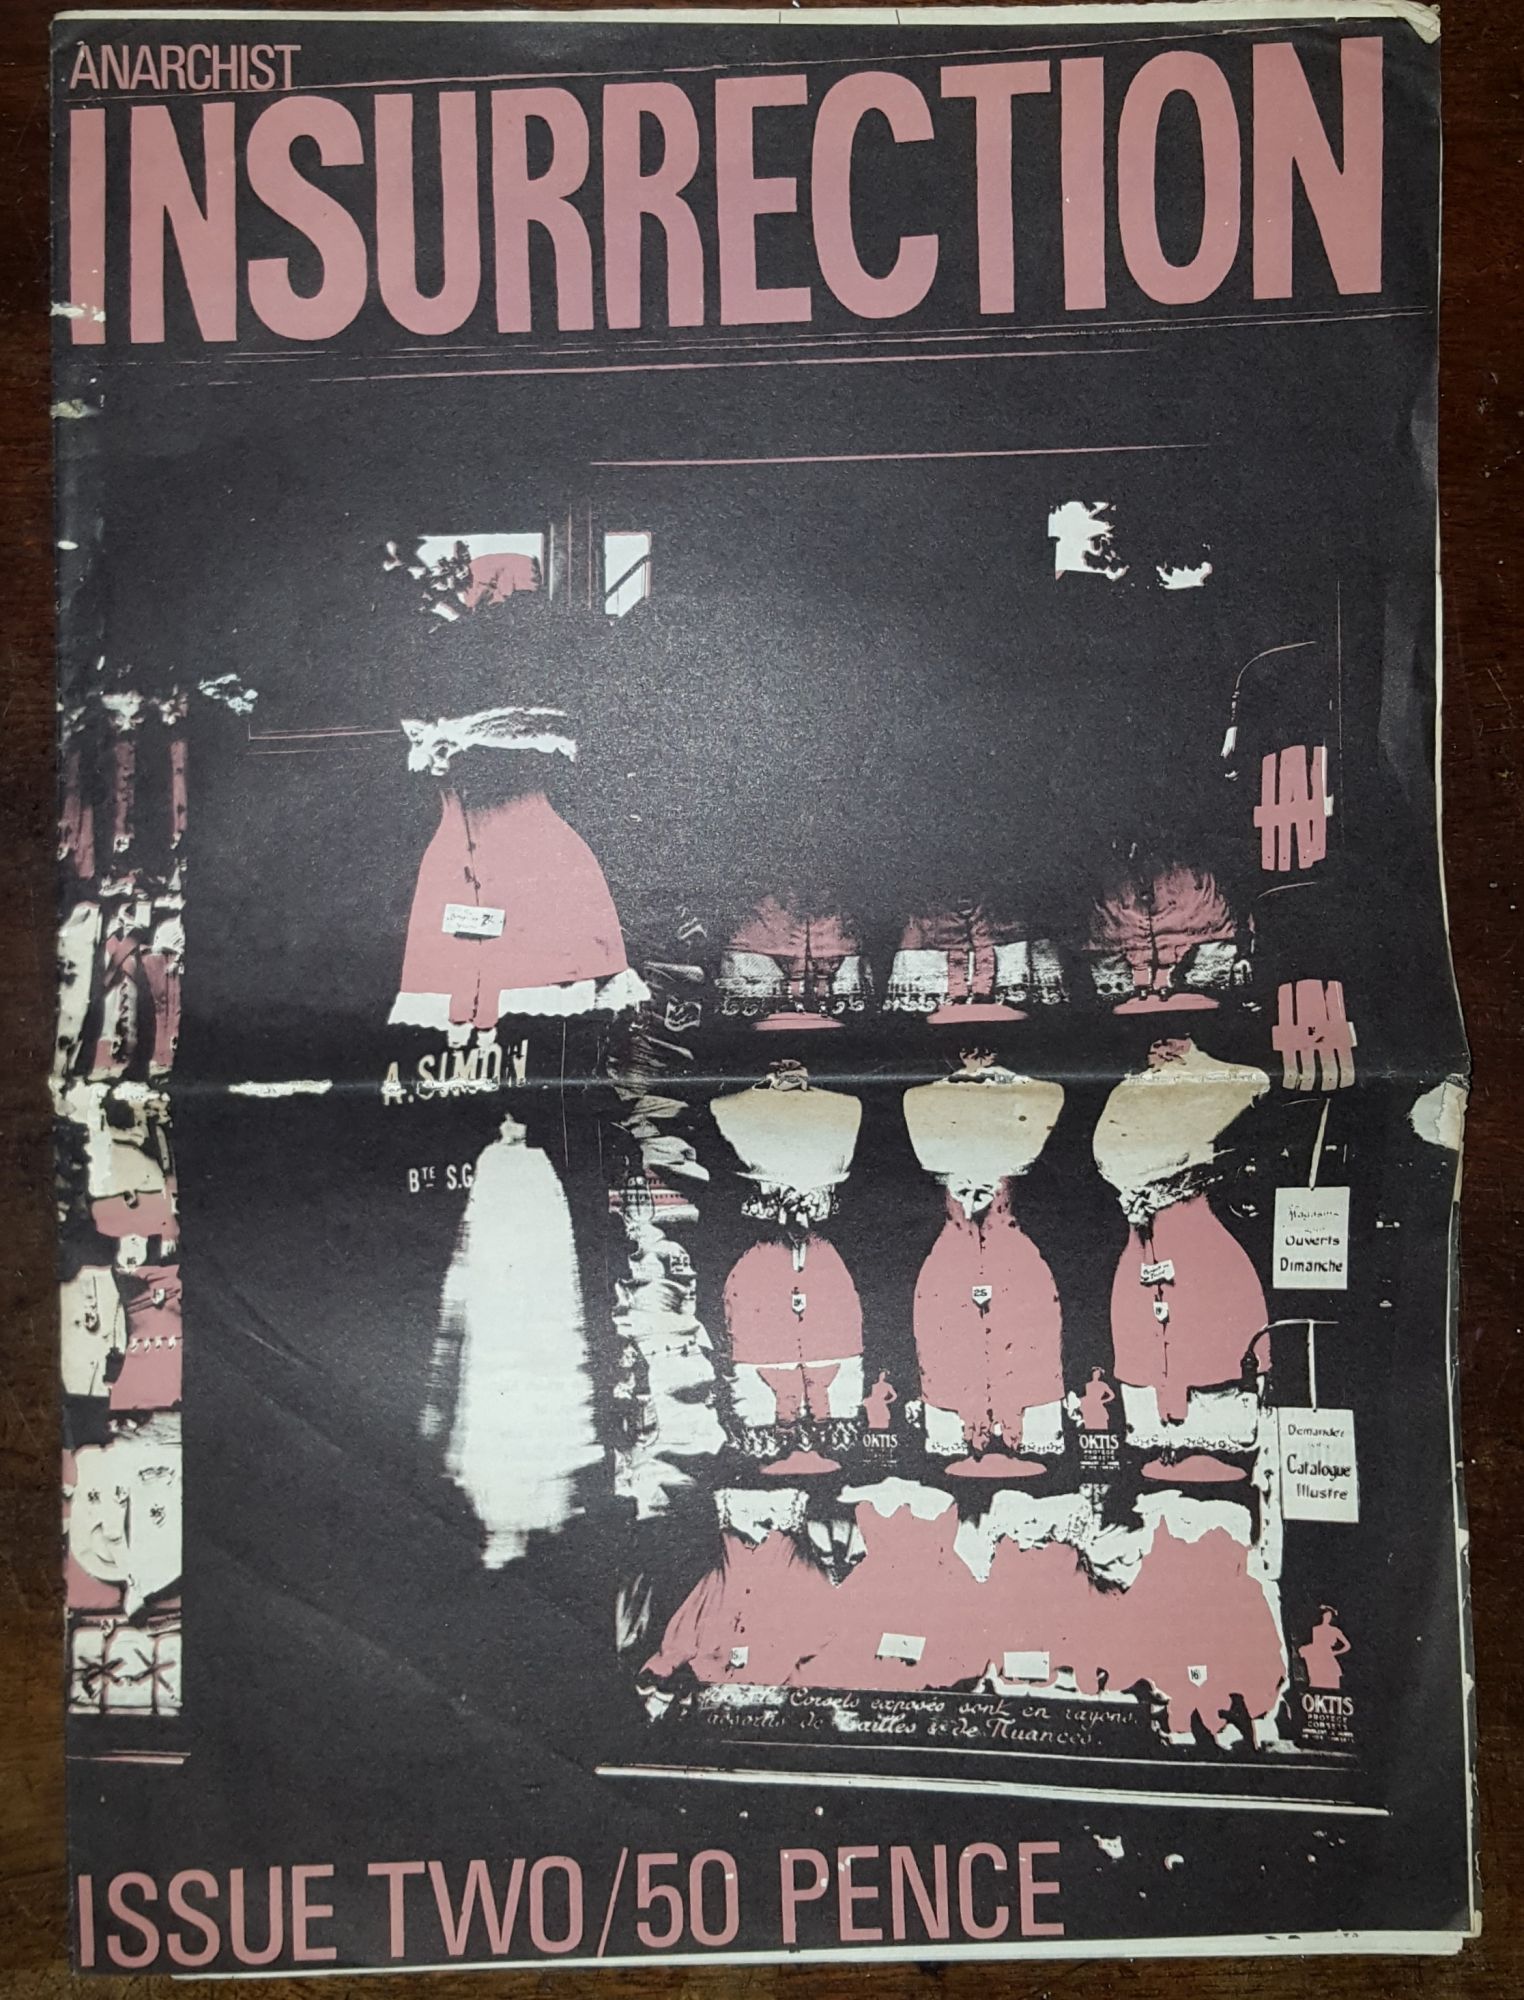 WEIR Jean - Anarchist Insurrection Issue Two